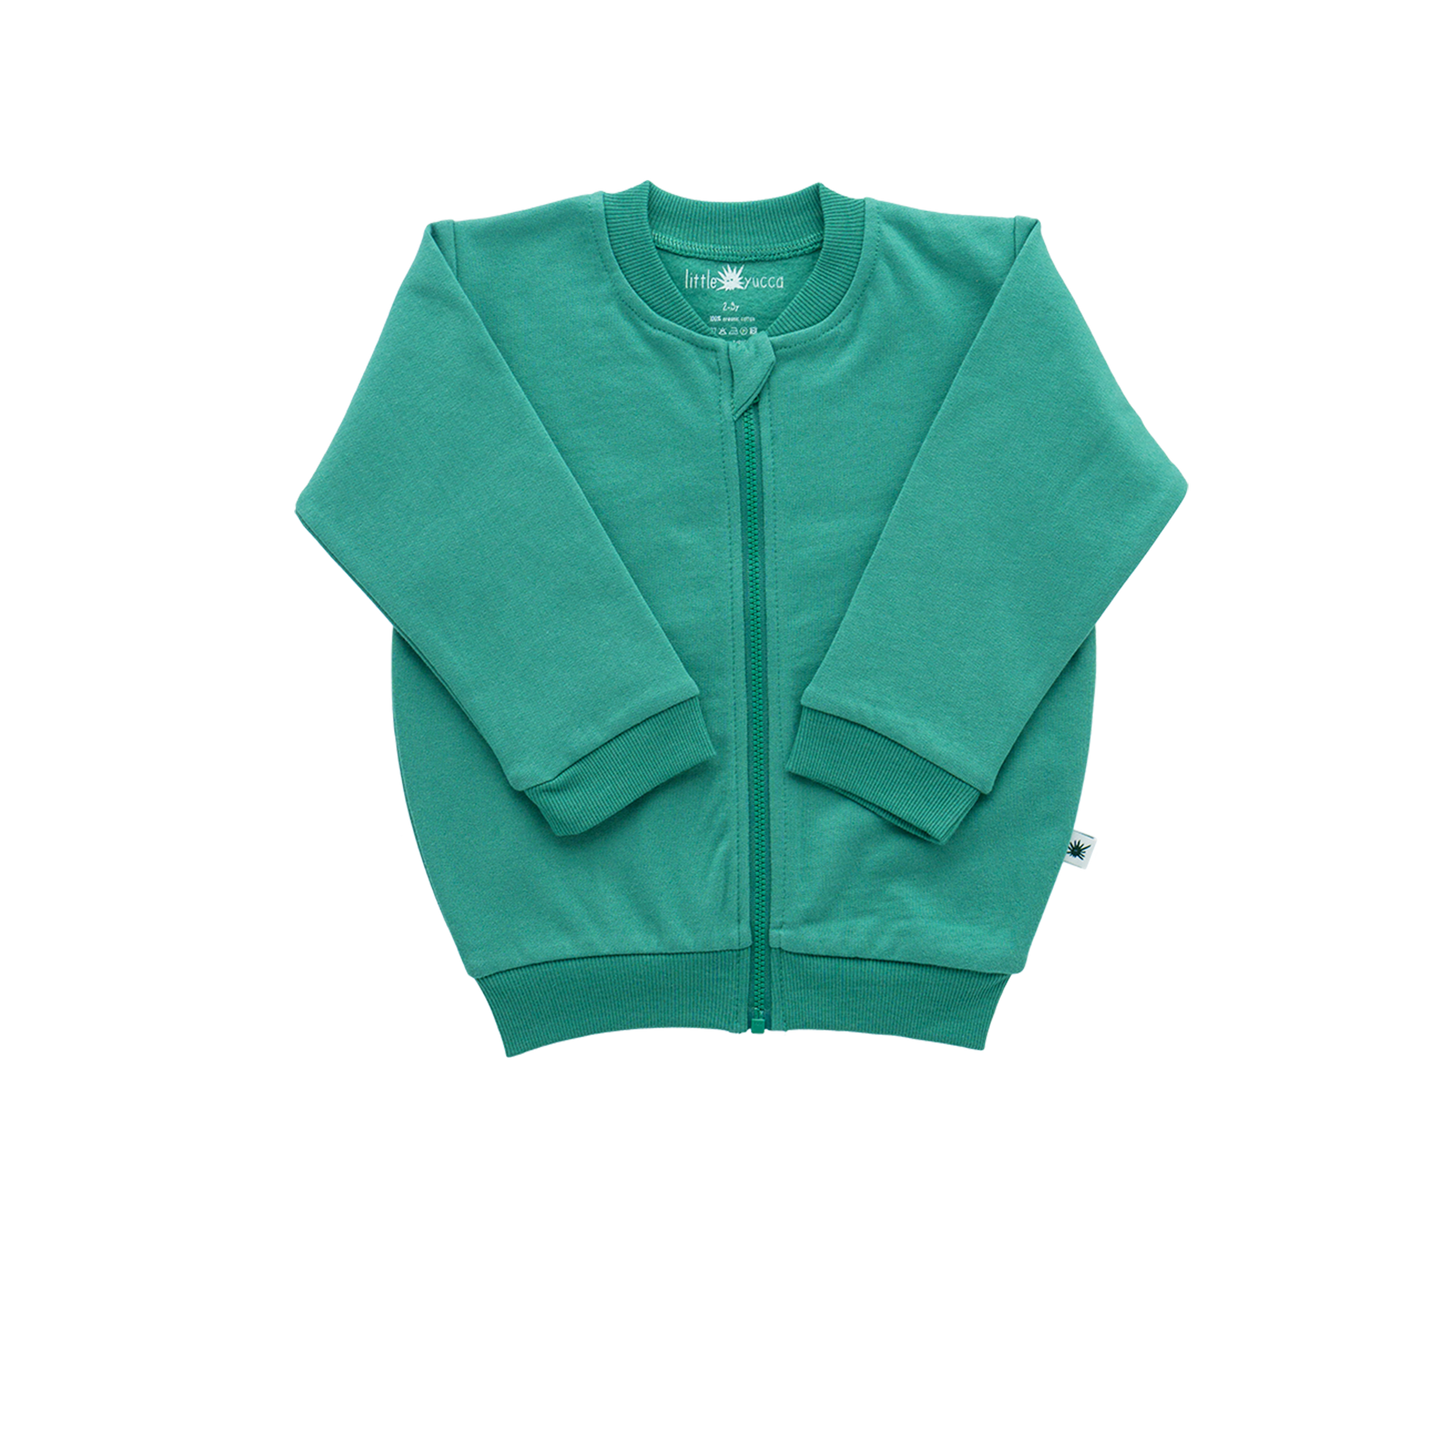 Organic "Bomber" jacket -Aged 6m to 5 Yrs- Colored Green